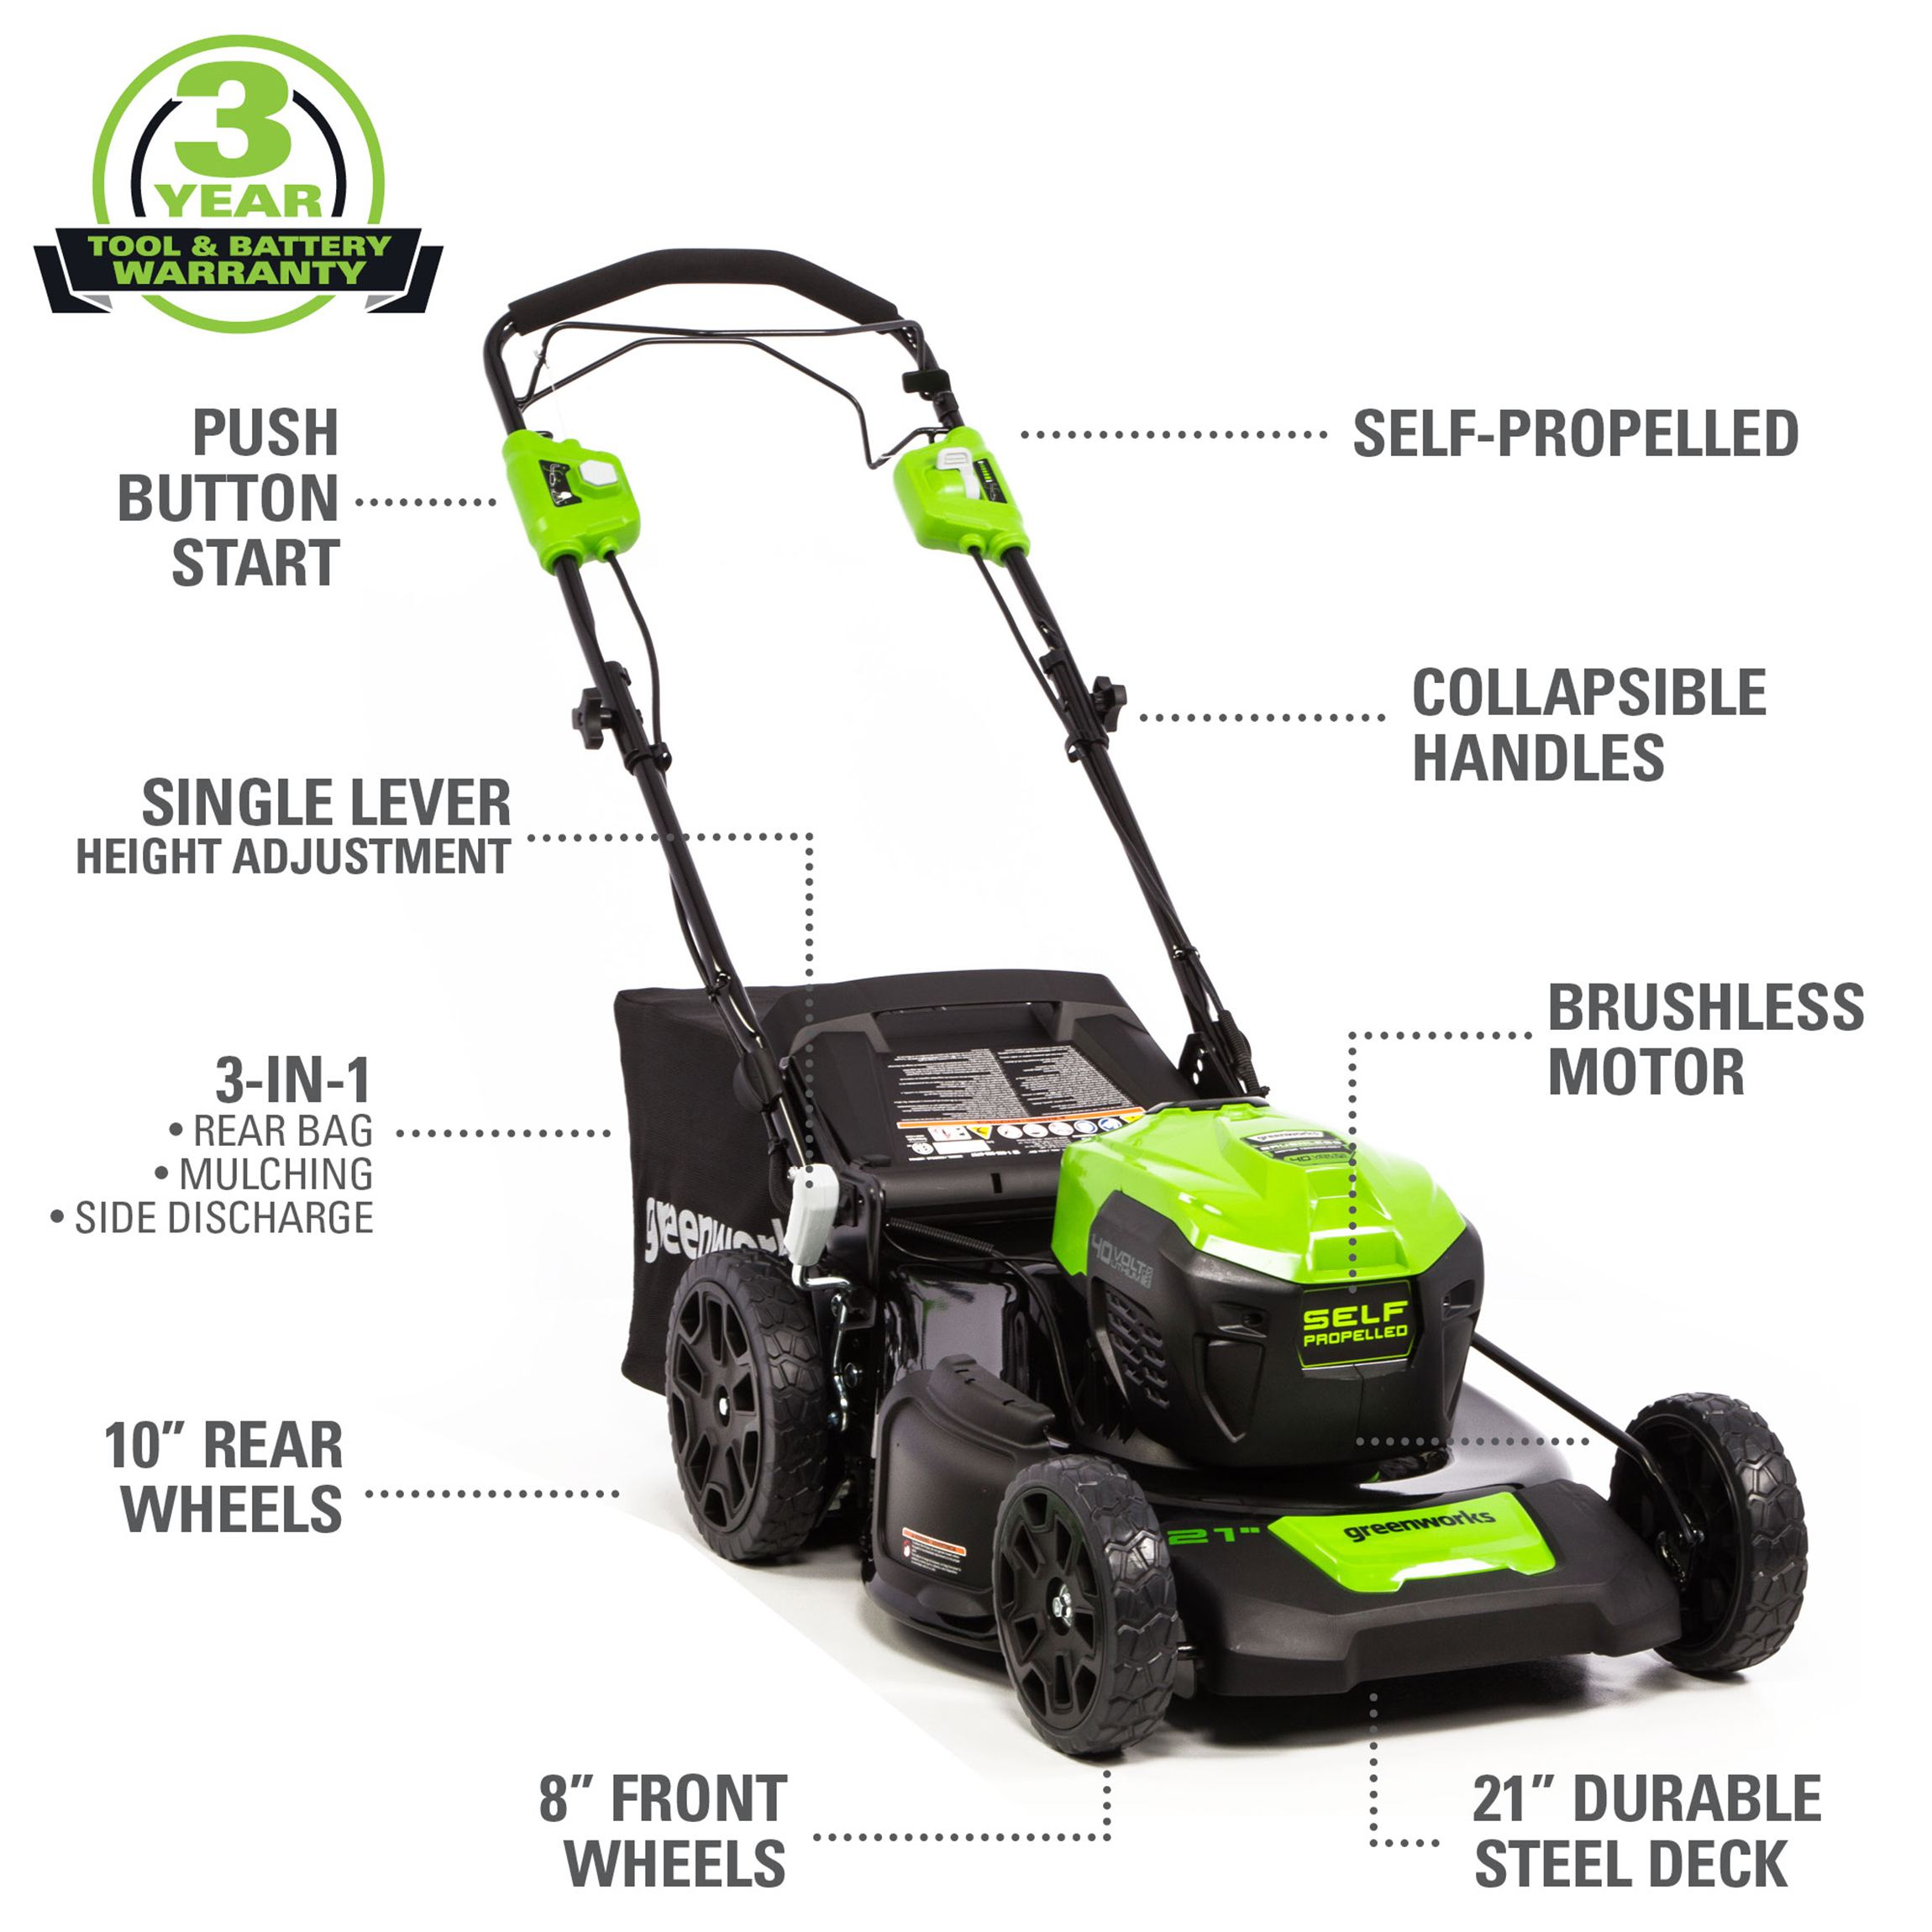 Greenworks 21" 40 Volt Battery Powered Self-Propelled Walk-Behind Mower, Battery Not Included - image 2 of 12